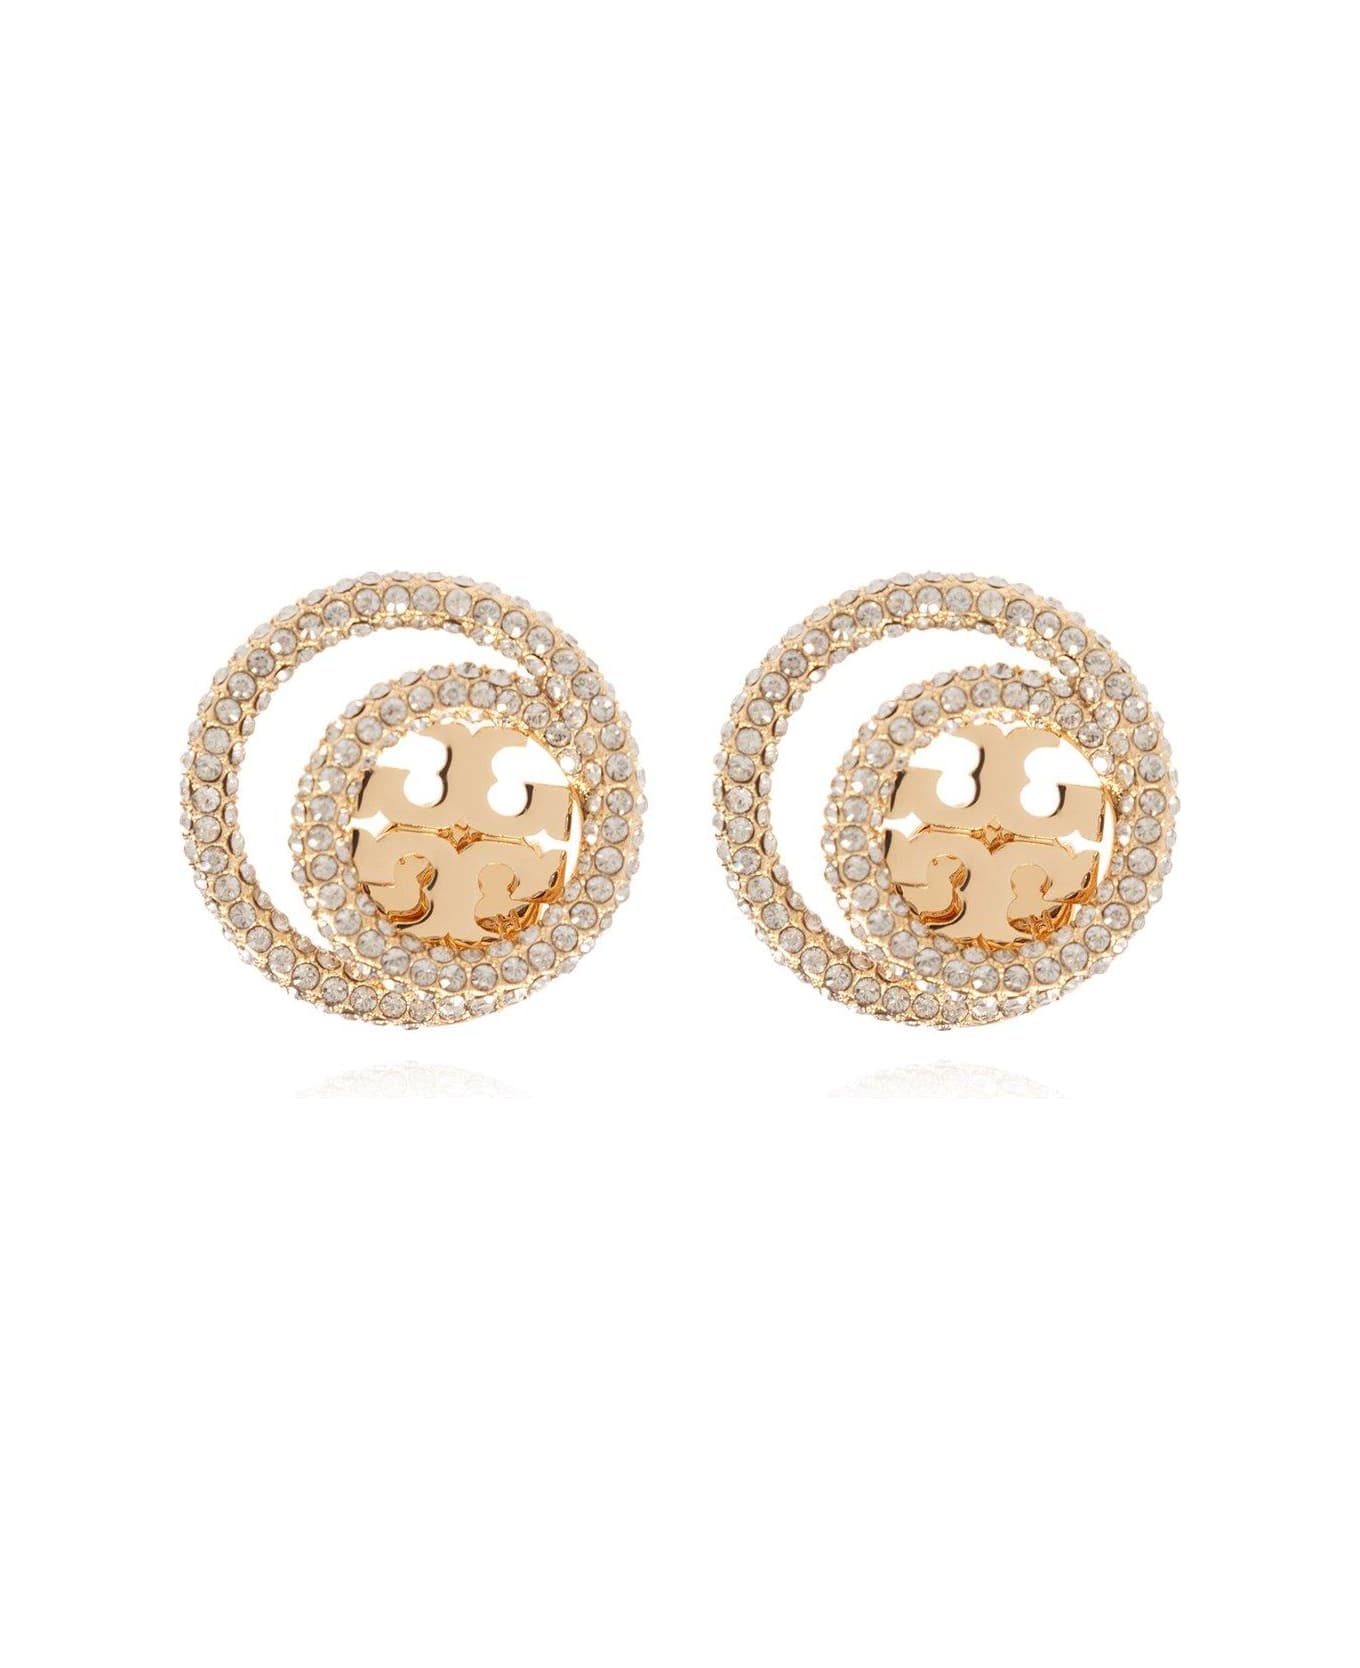 Tory Burch Double-ring Embellished Earrings - Gold/crystal